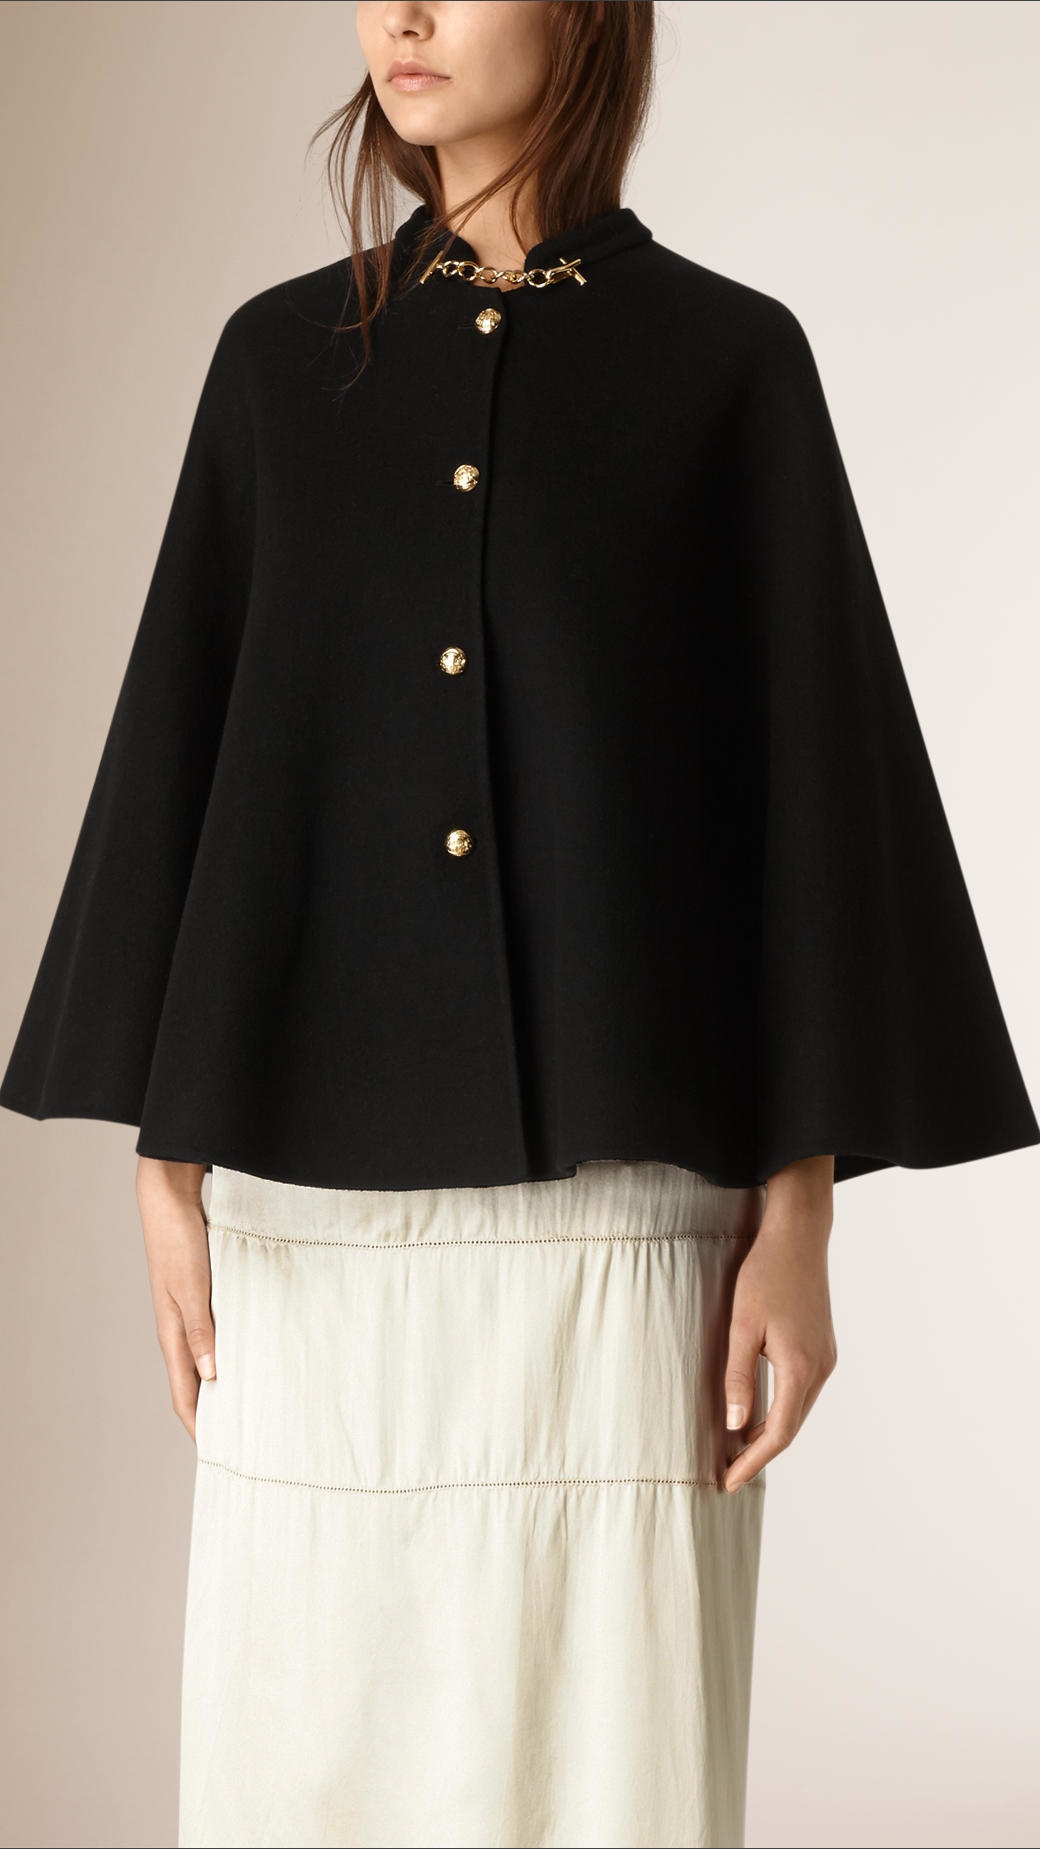 Burberry Military Detail Cashmere Cape in Black - Lyst